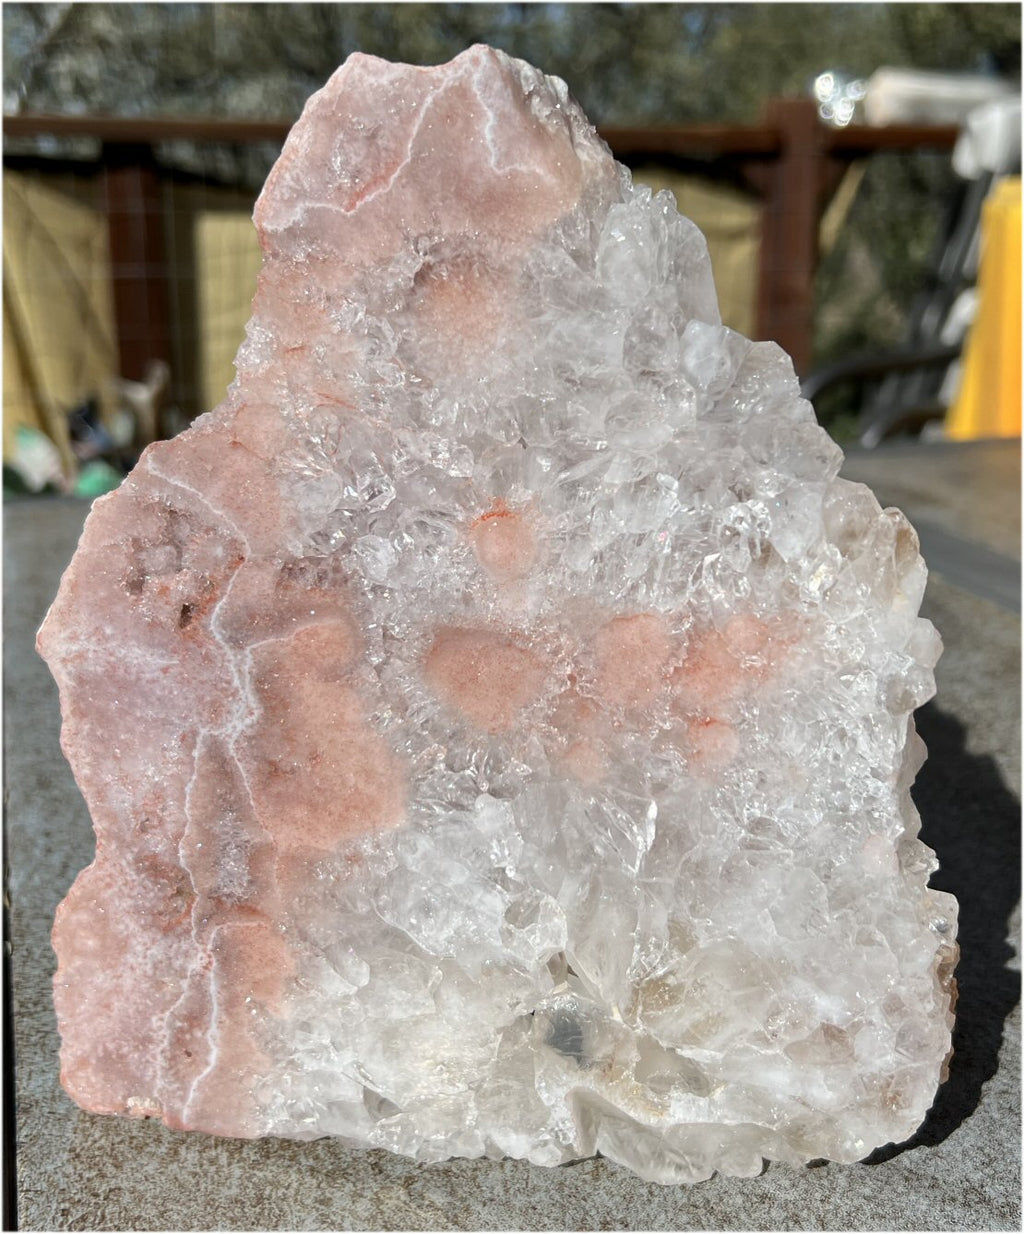 5lbs+ Pink Amethyst Standing Stone with Vugs, Lots of Sparkly Quartz Inclusions - Cleanse + Balance Emotions